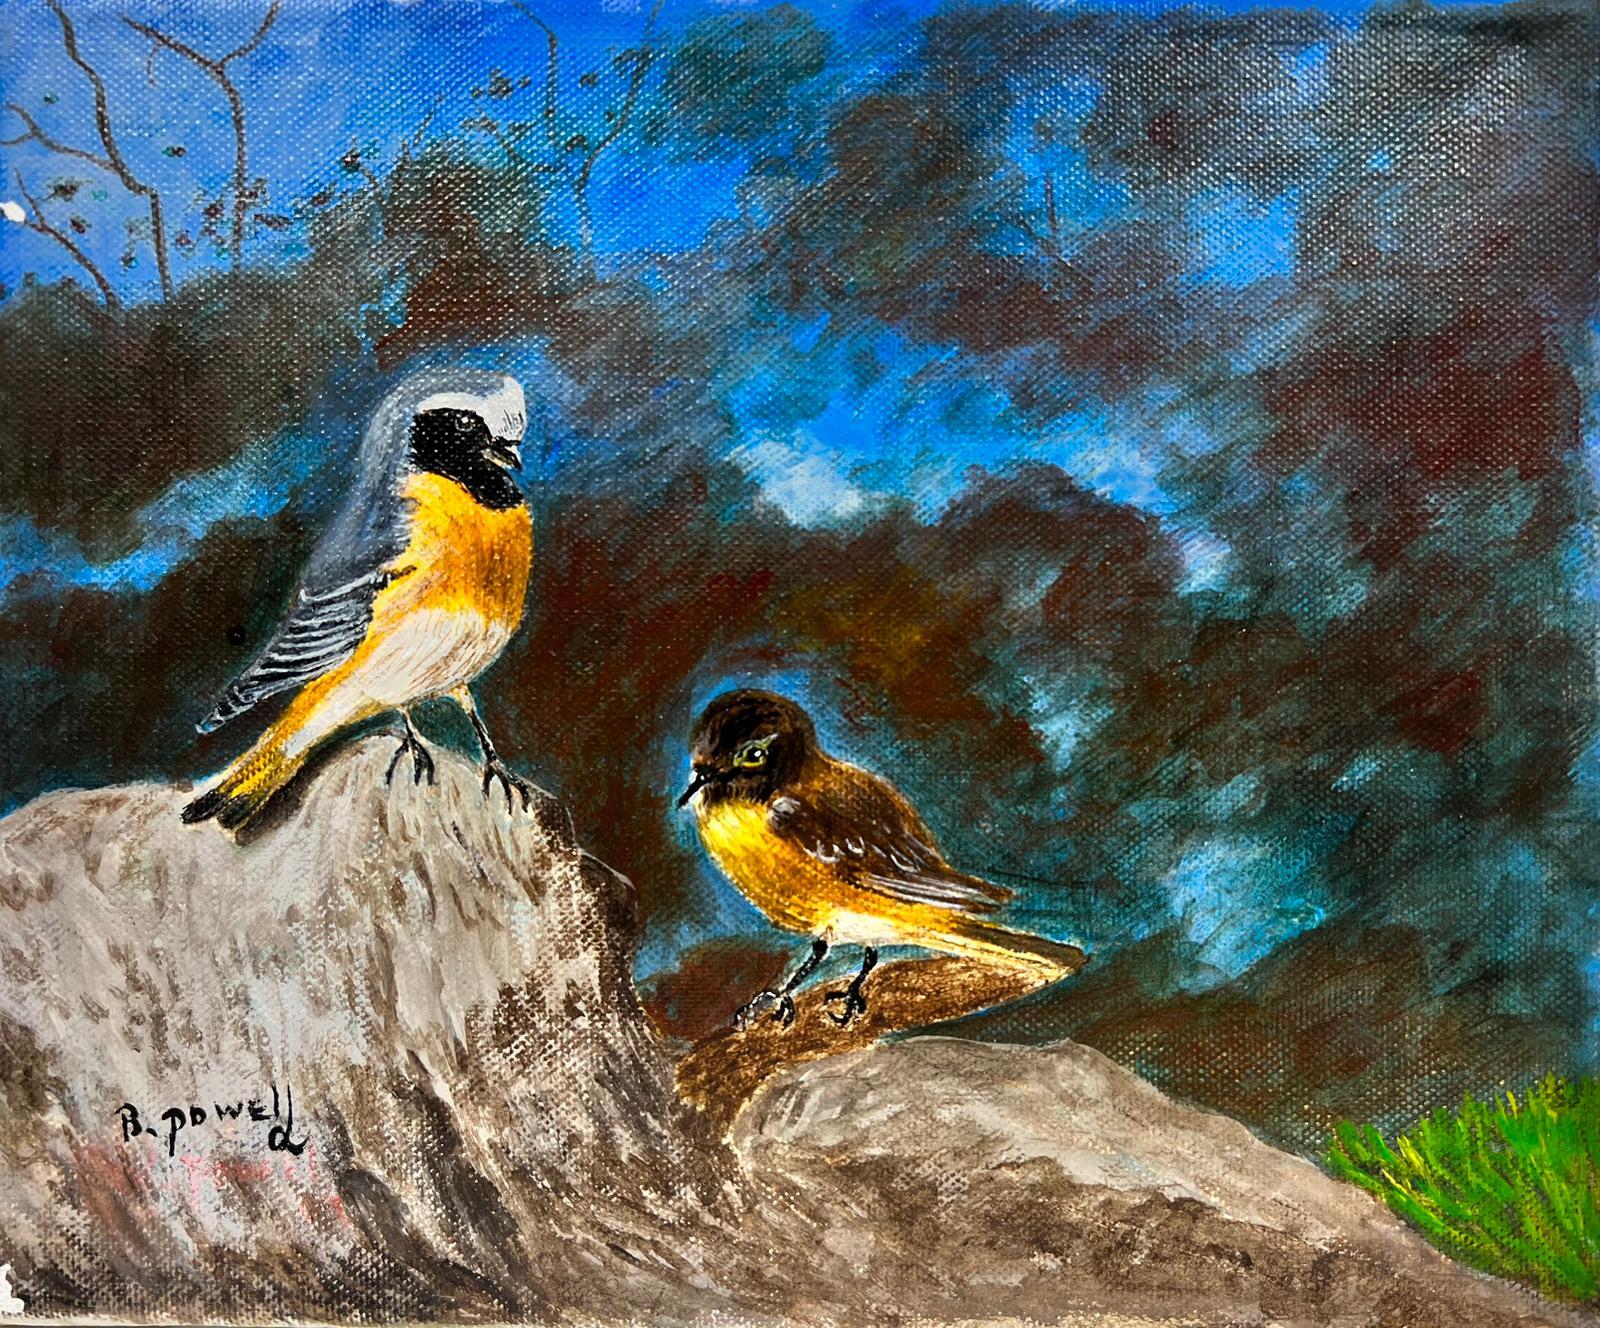 Ben Powell Animal Painting - Contemporary British Acrylic Painting Blue Tit and Yellow Breasted Chat Bird